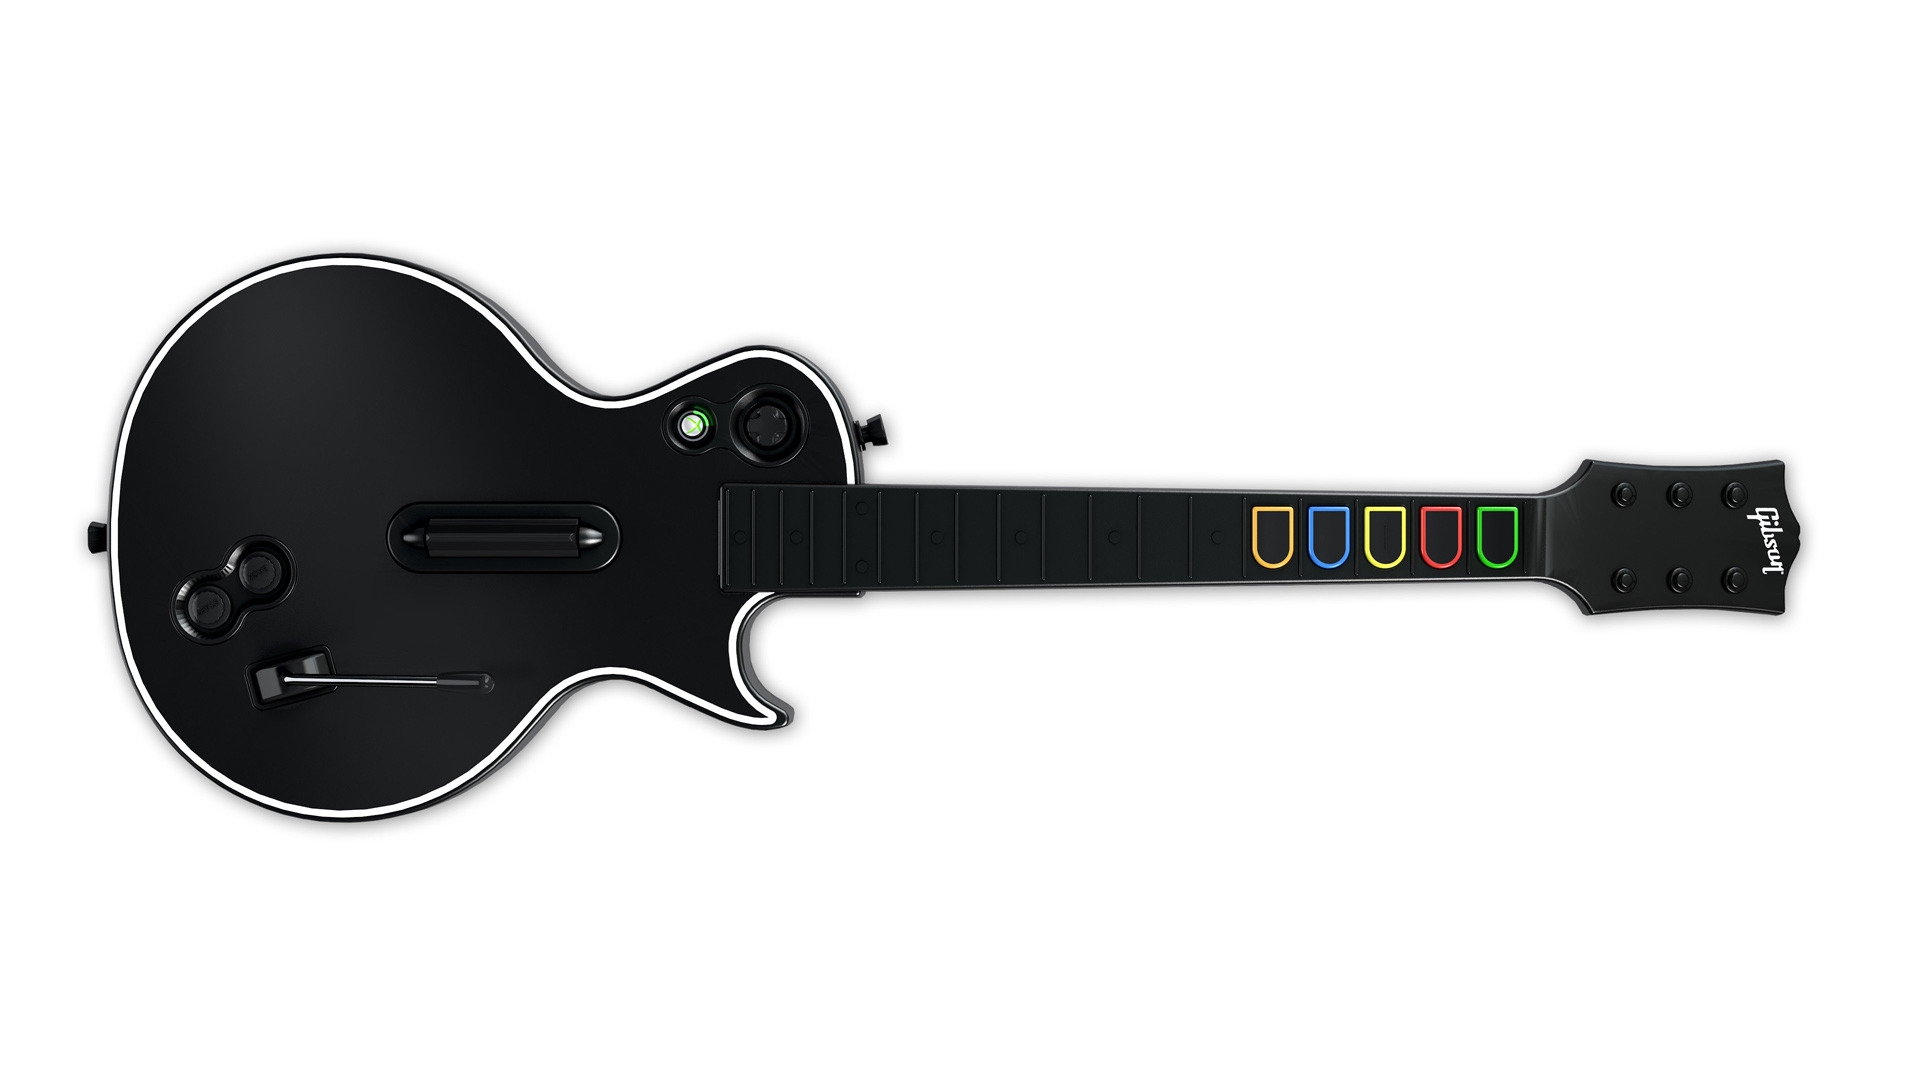 Gibson for 1920 x 1080 HDTV 1080p resolution